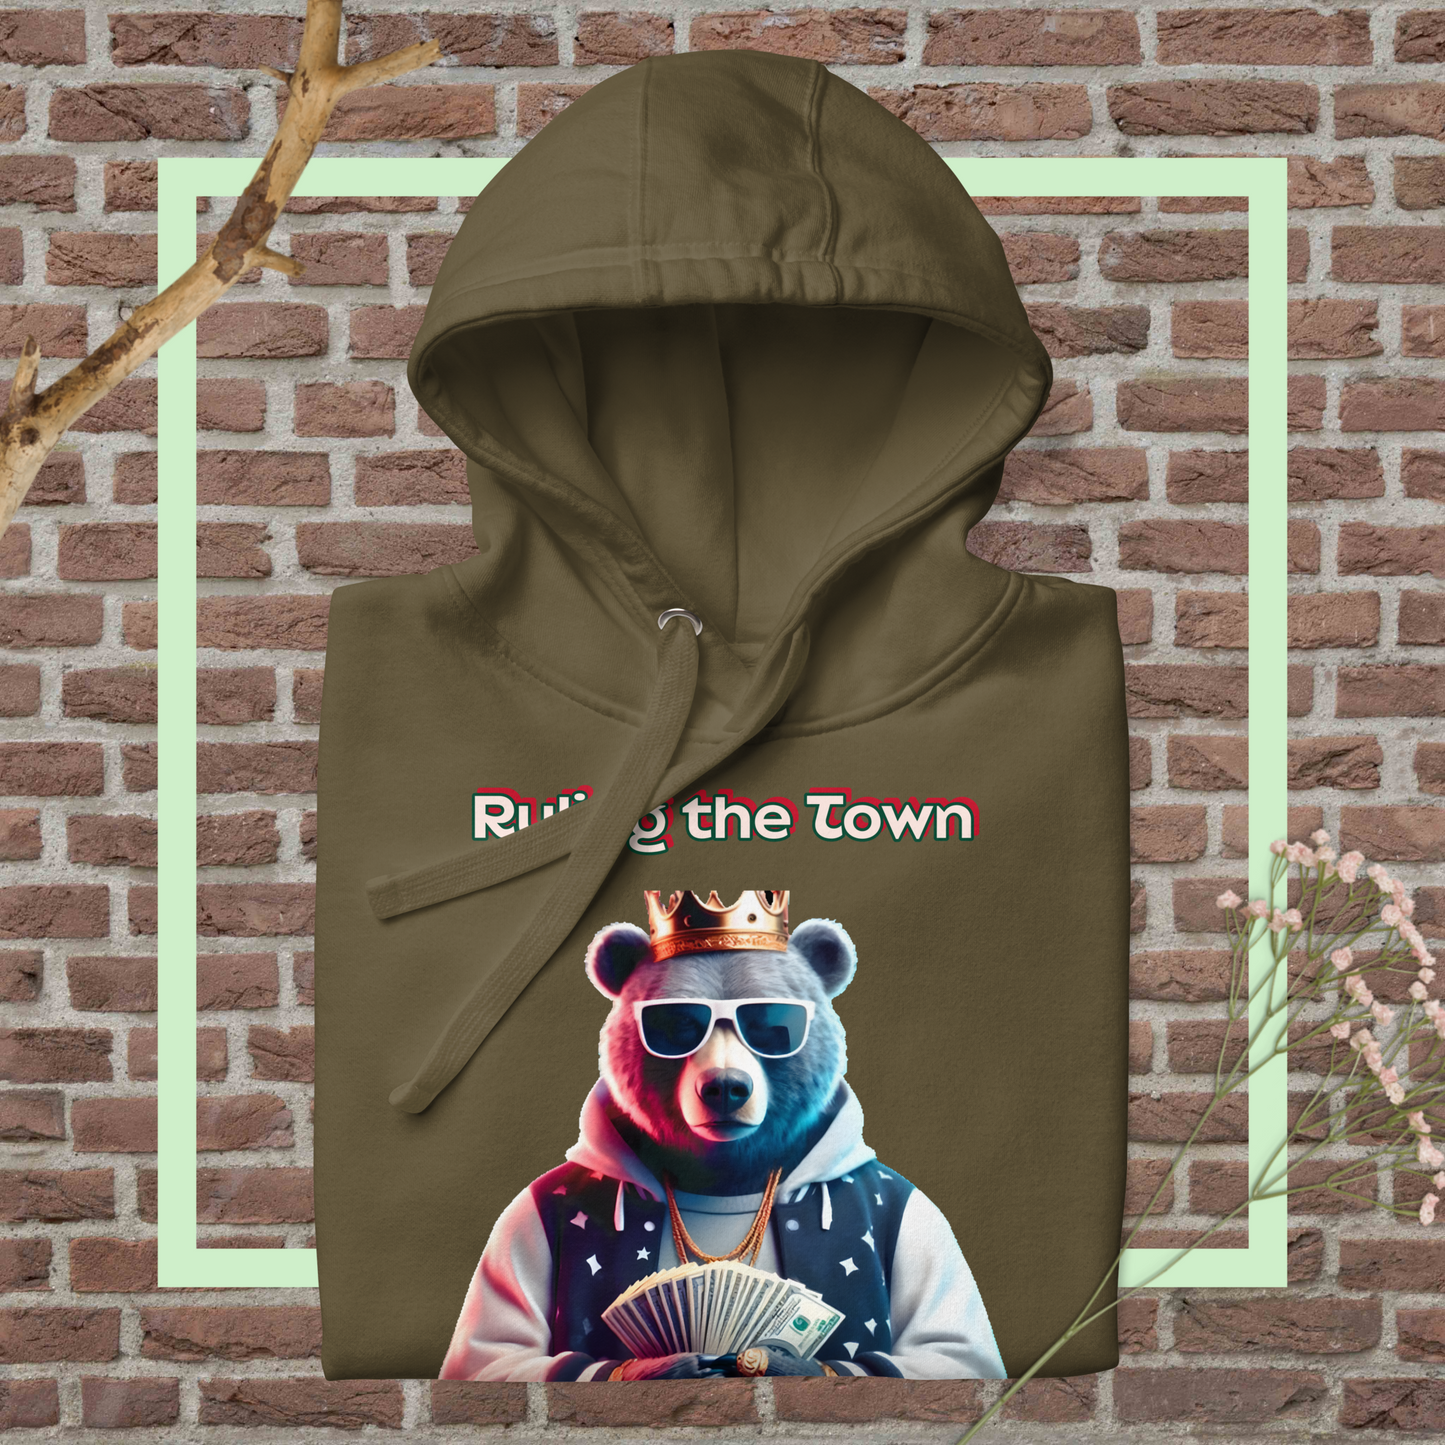 💕The Bear with Cash🐻💵 and a Crown Ruling the Town👑 Unisex Hoodie🧥